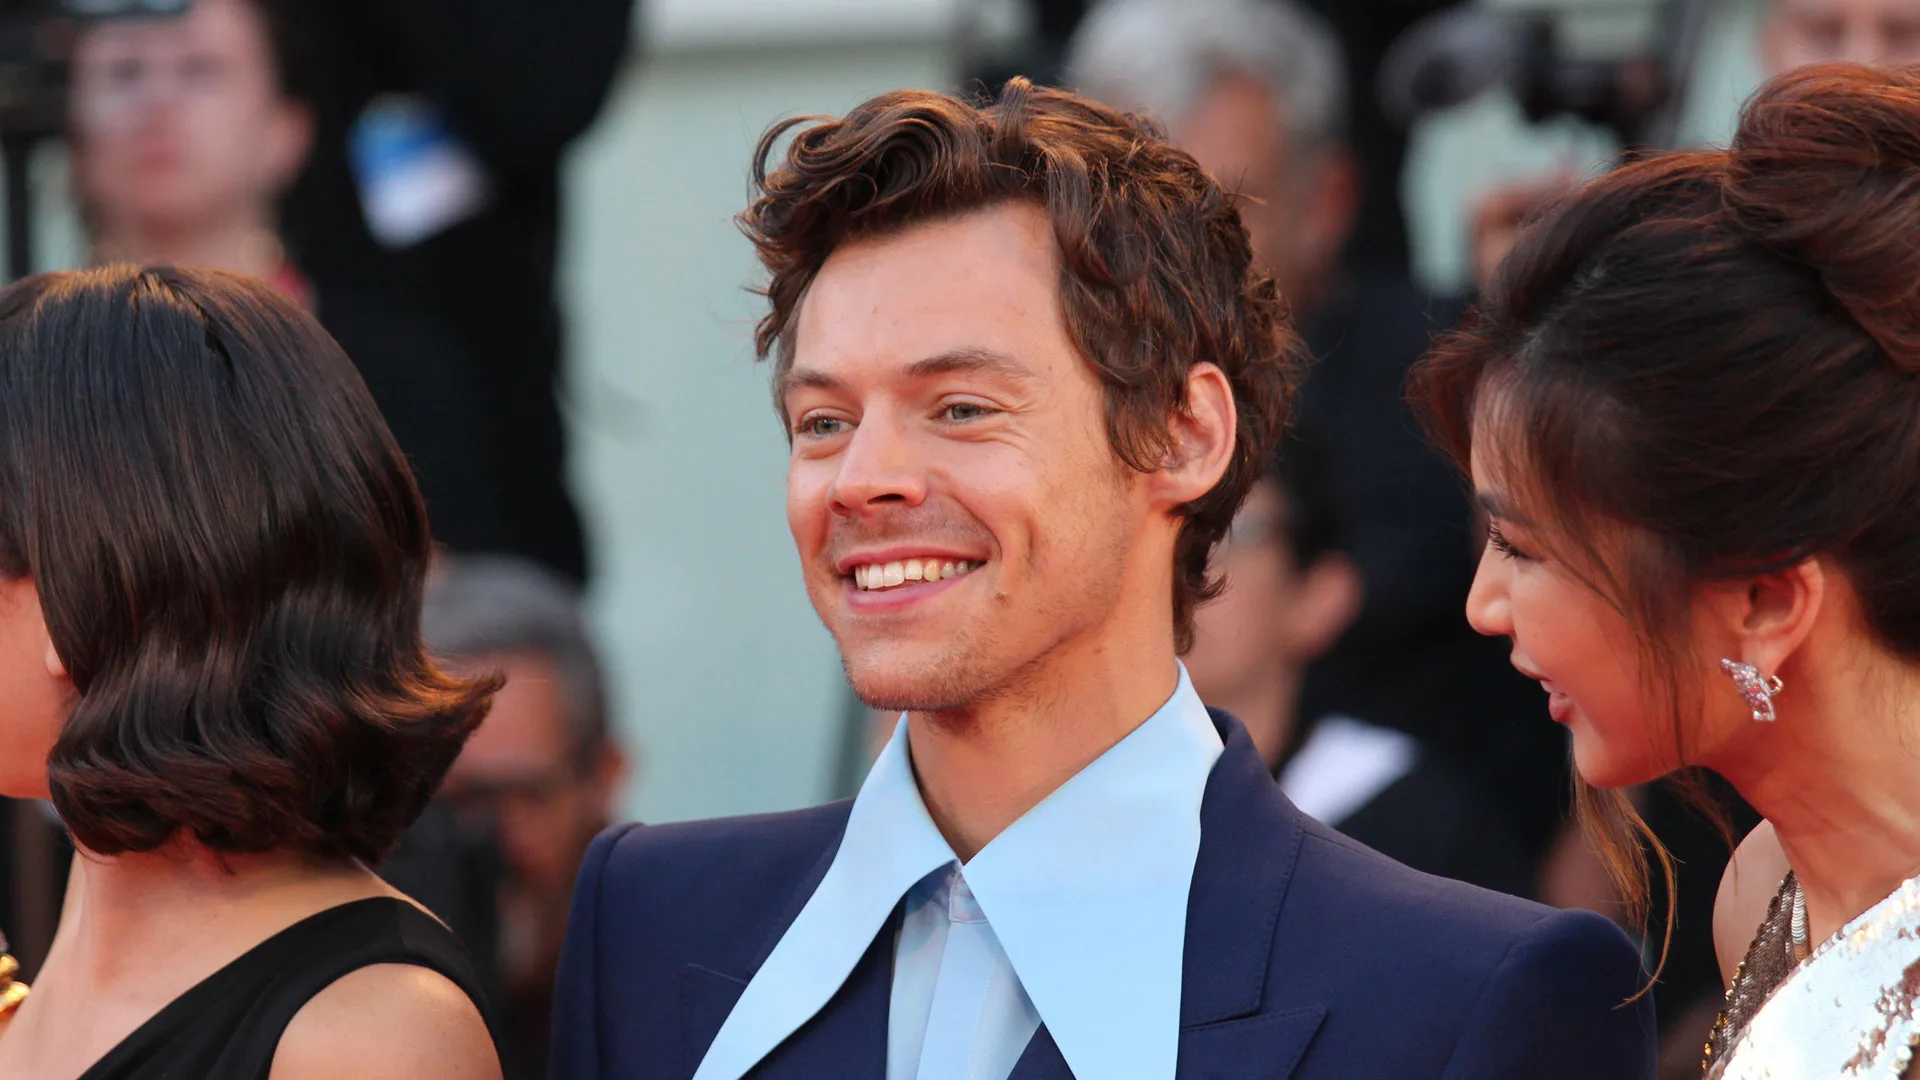 A photograph of Harry Styles wearing a big blue collared shirt smiling to someone off camera